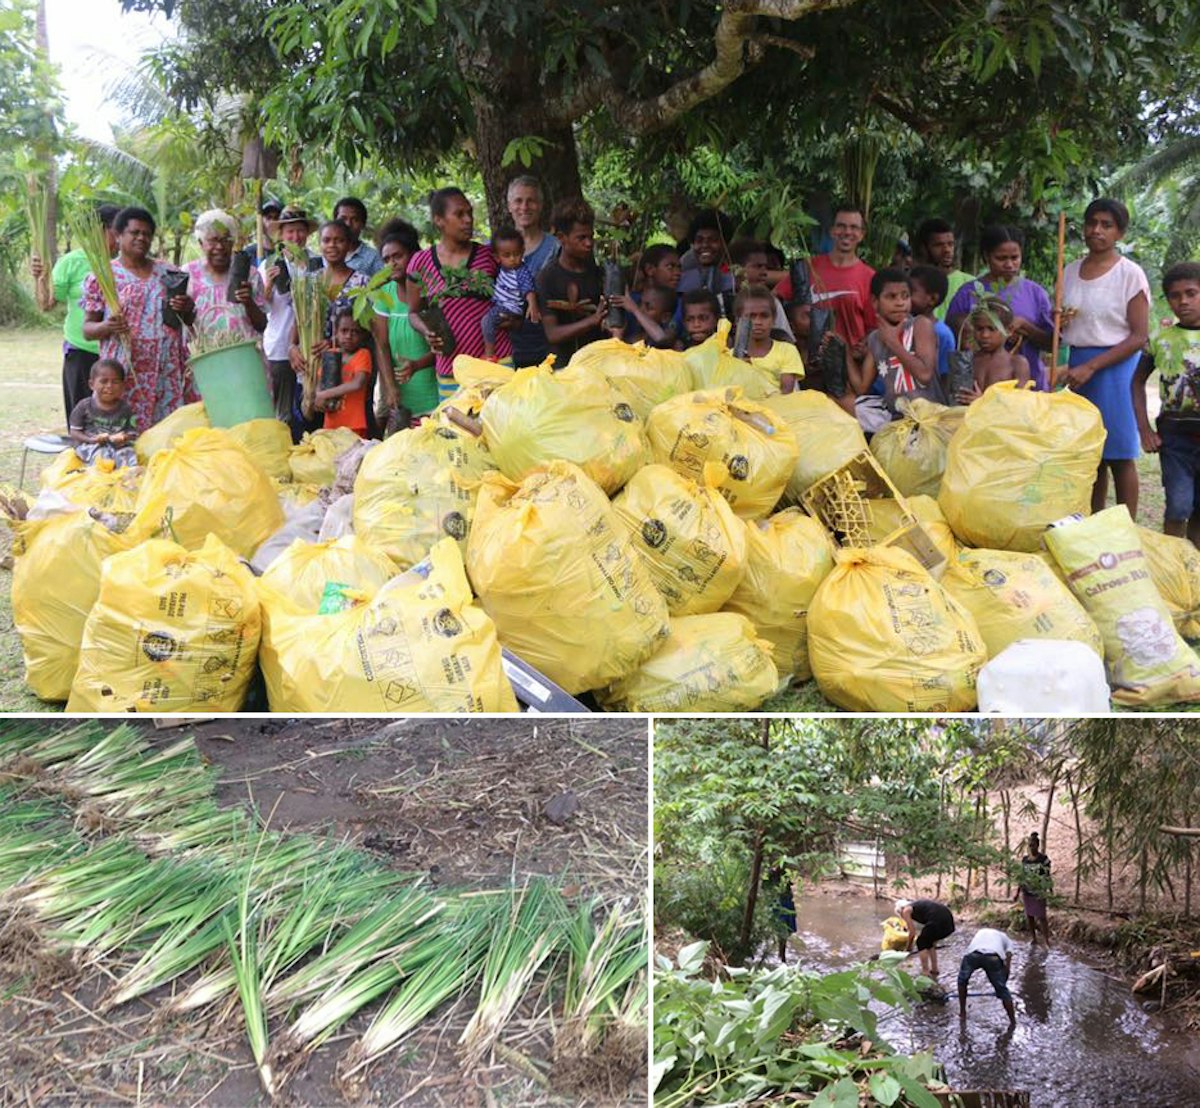 As part of initiatives to mark the bicentenary in a suburb of Port Vila, Vanuatu, friends, neighbors, and government officials collaborated to clean a river, clearing trash from the channel and planting riverbank grasses to prevent soil erosion.